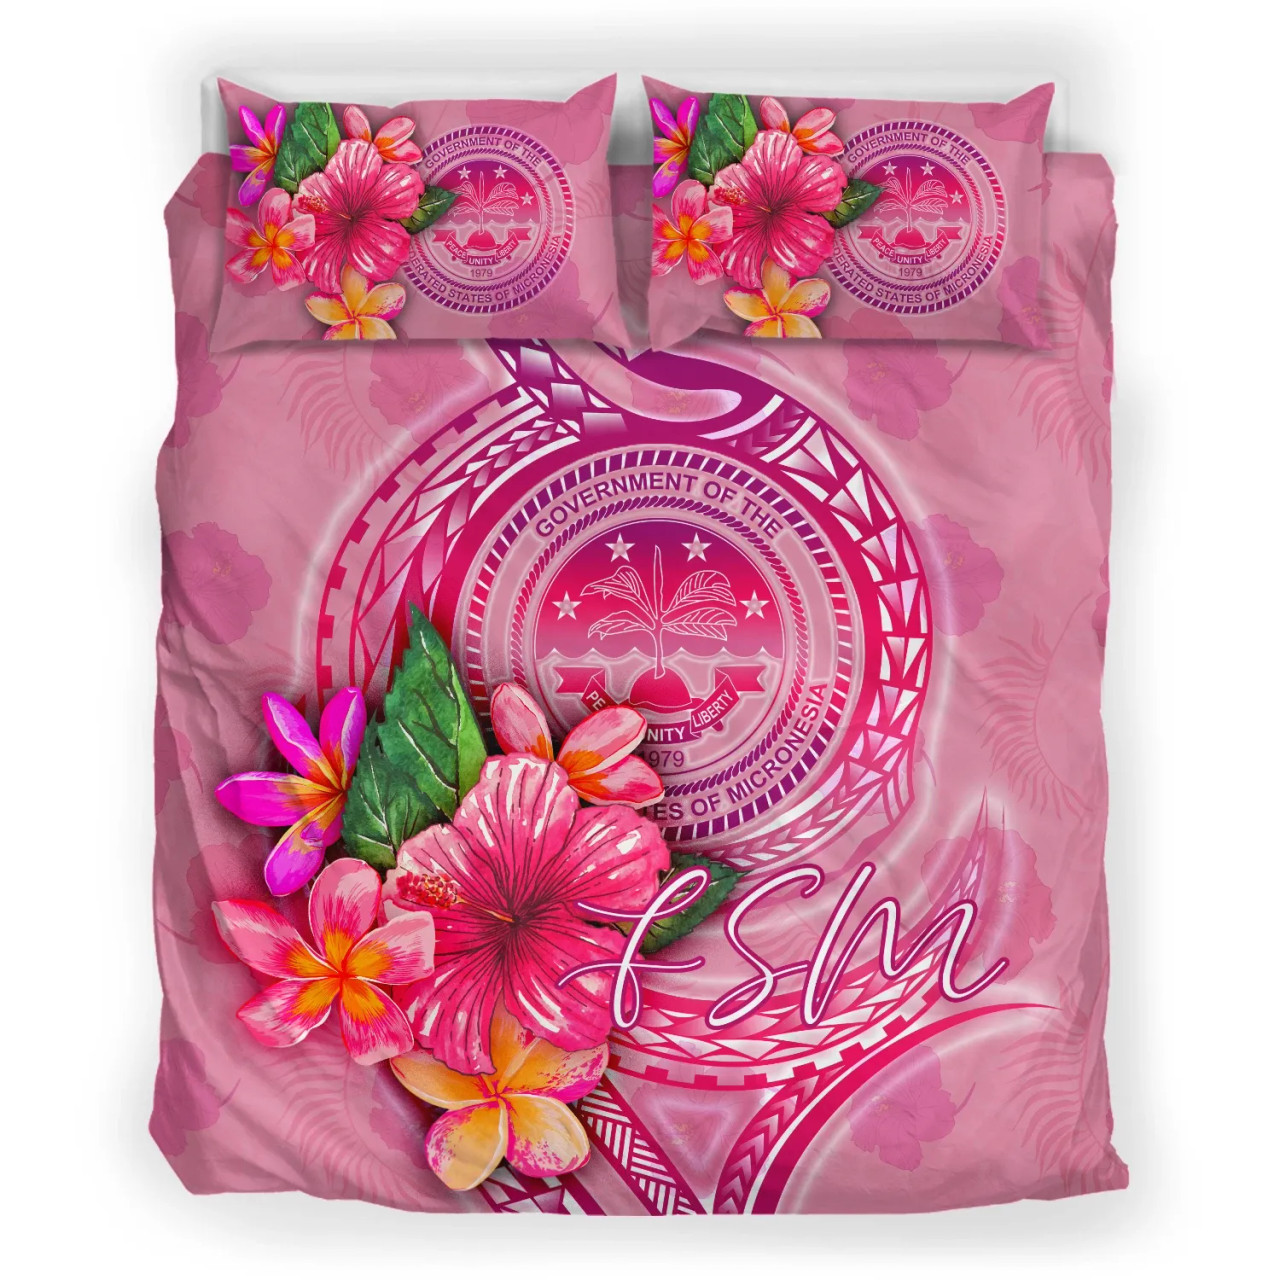 FSM Polynesian Bedding Set - Floral With Seal Pink 3